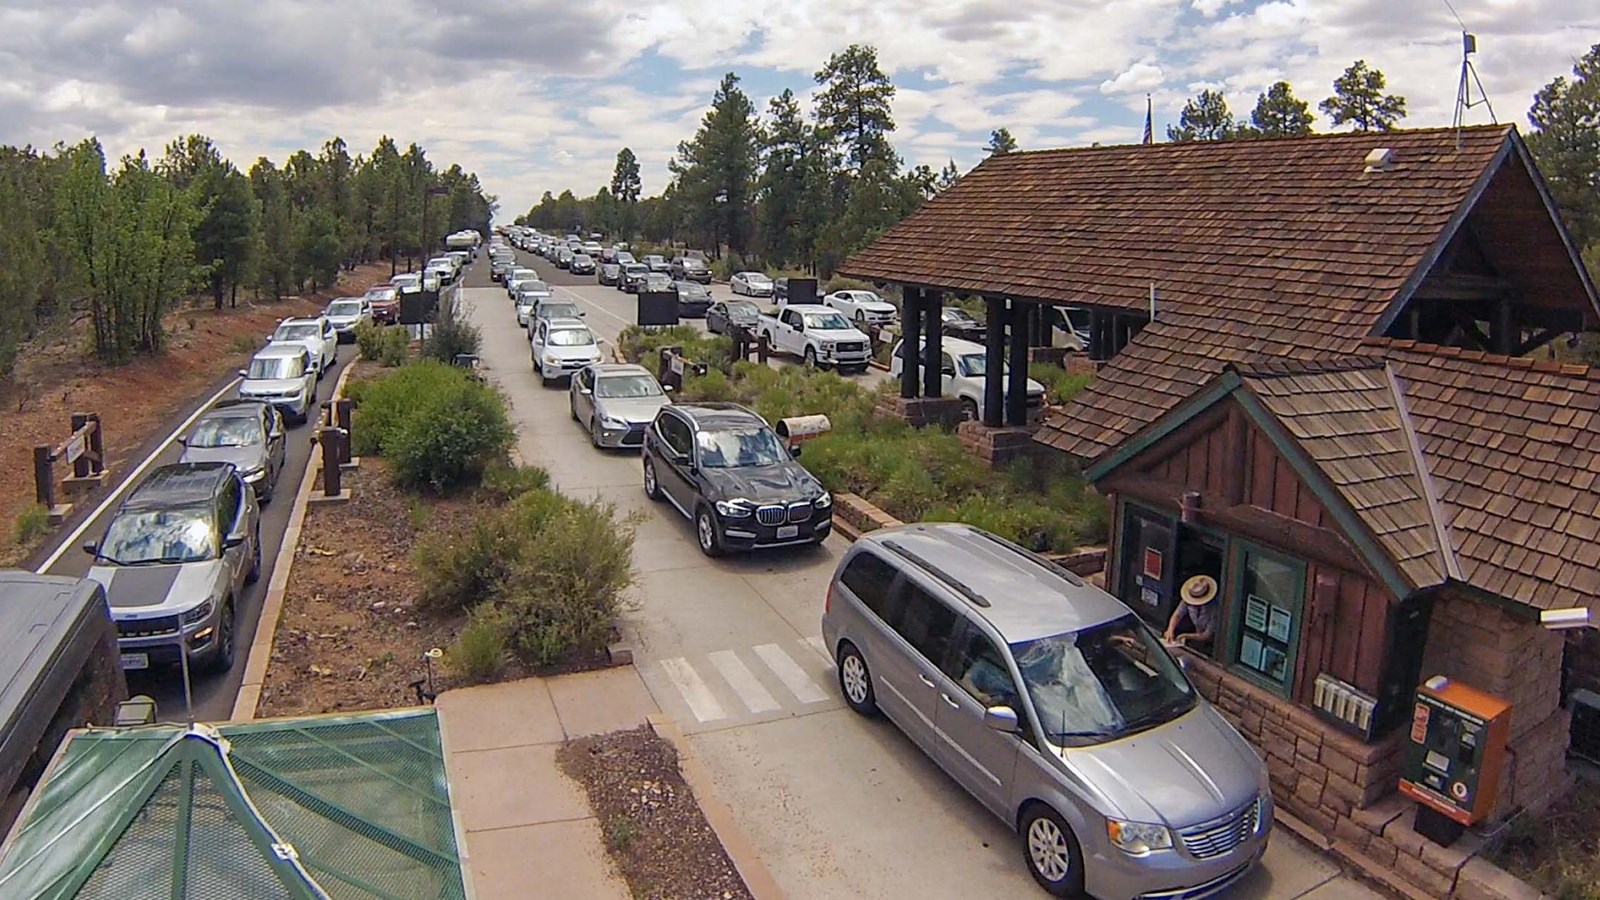 Multiple lines of cars wait in line at a two peaked wooden building that covers the lanes. 